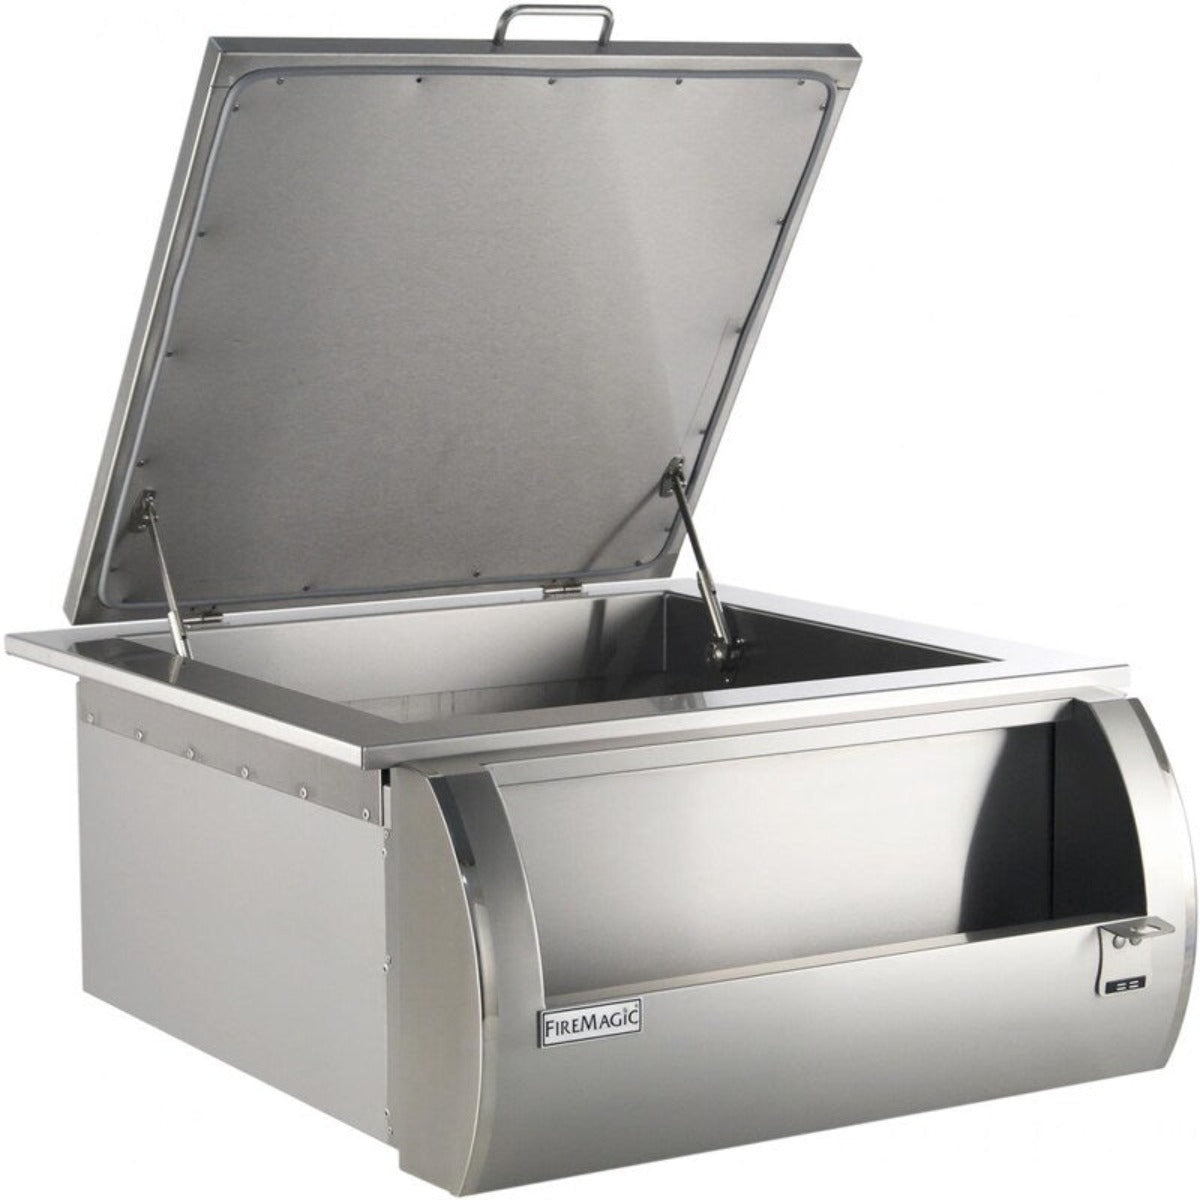 Fire Magic Grills Built-In Refreshment Center with insulated lid - Echelon Style - Outdoorium